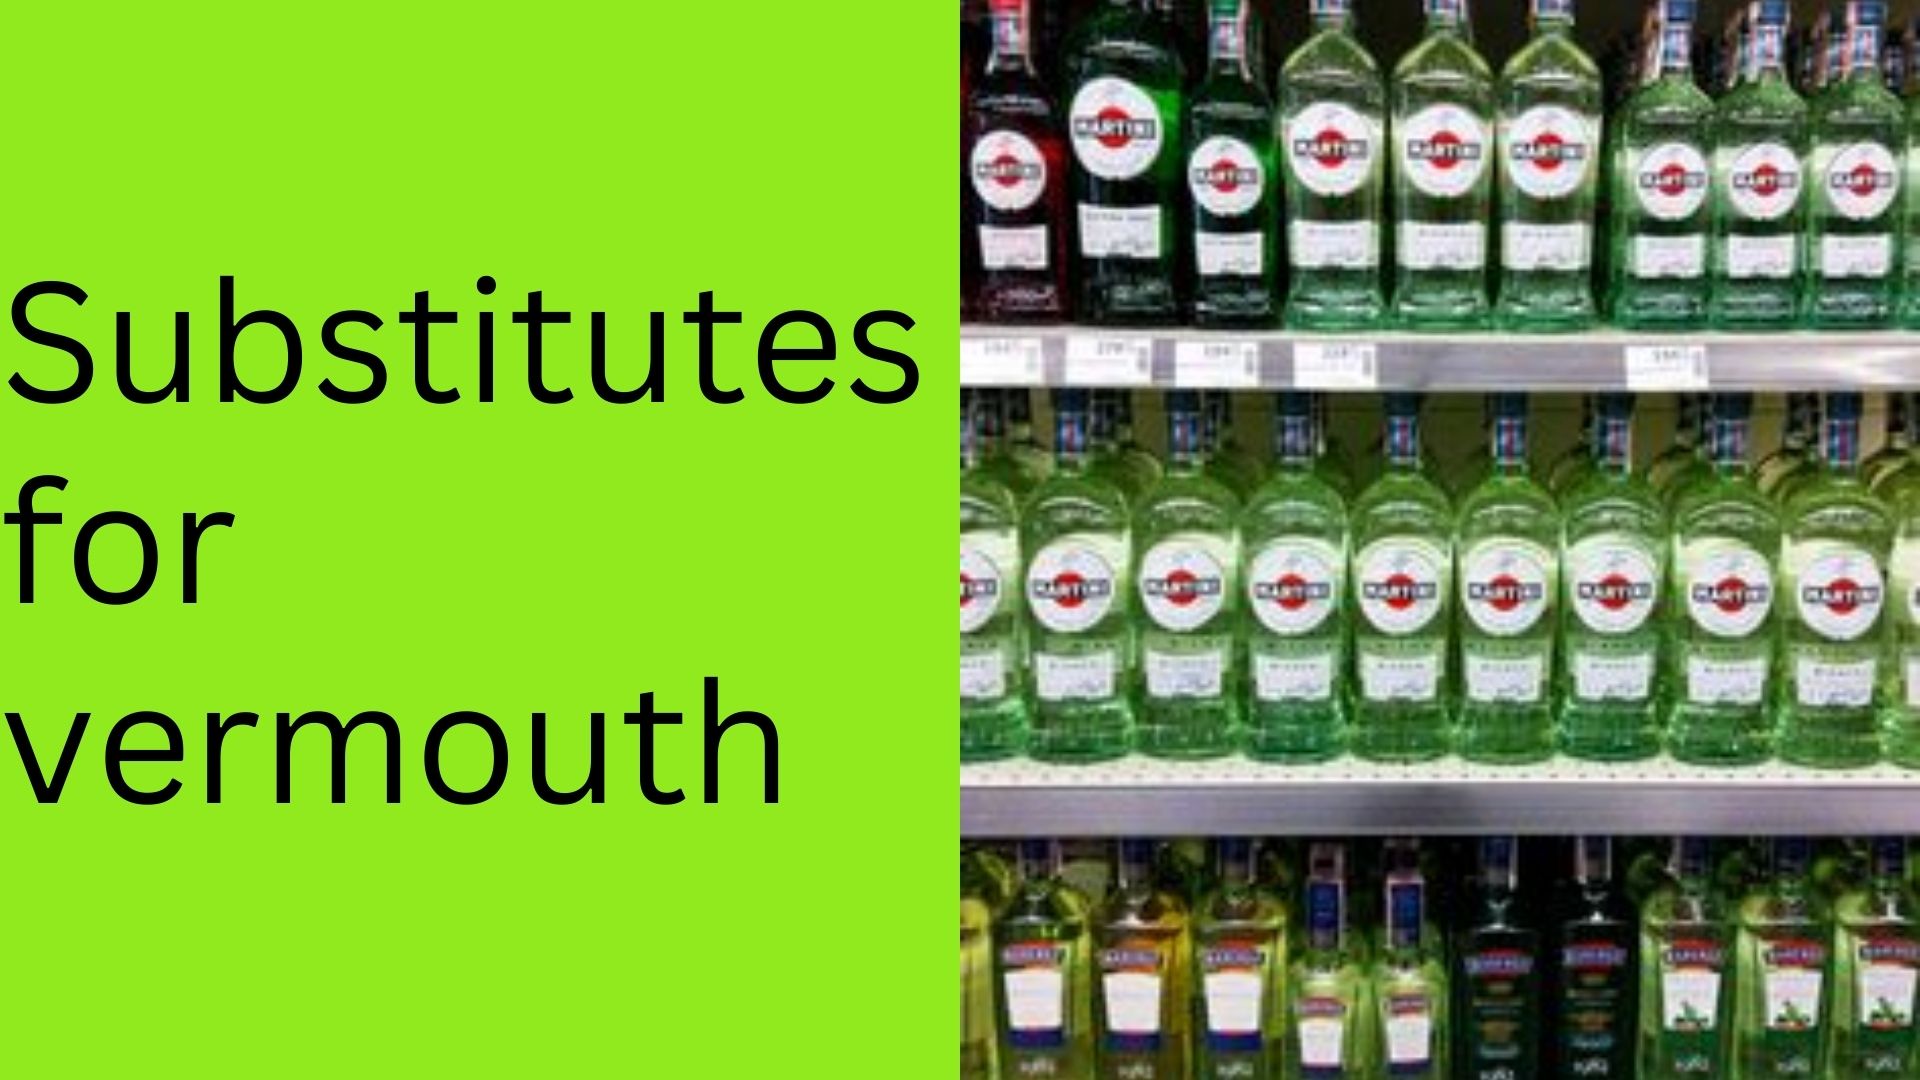 Substitutes for vermouth